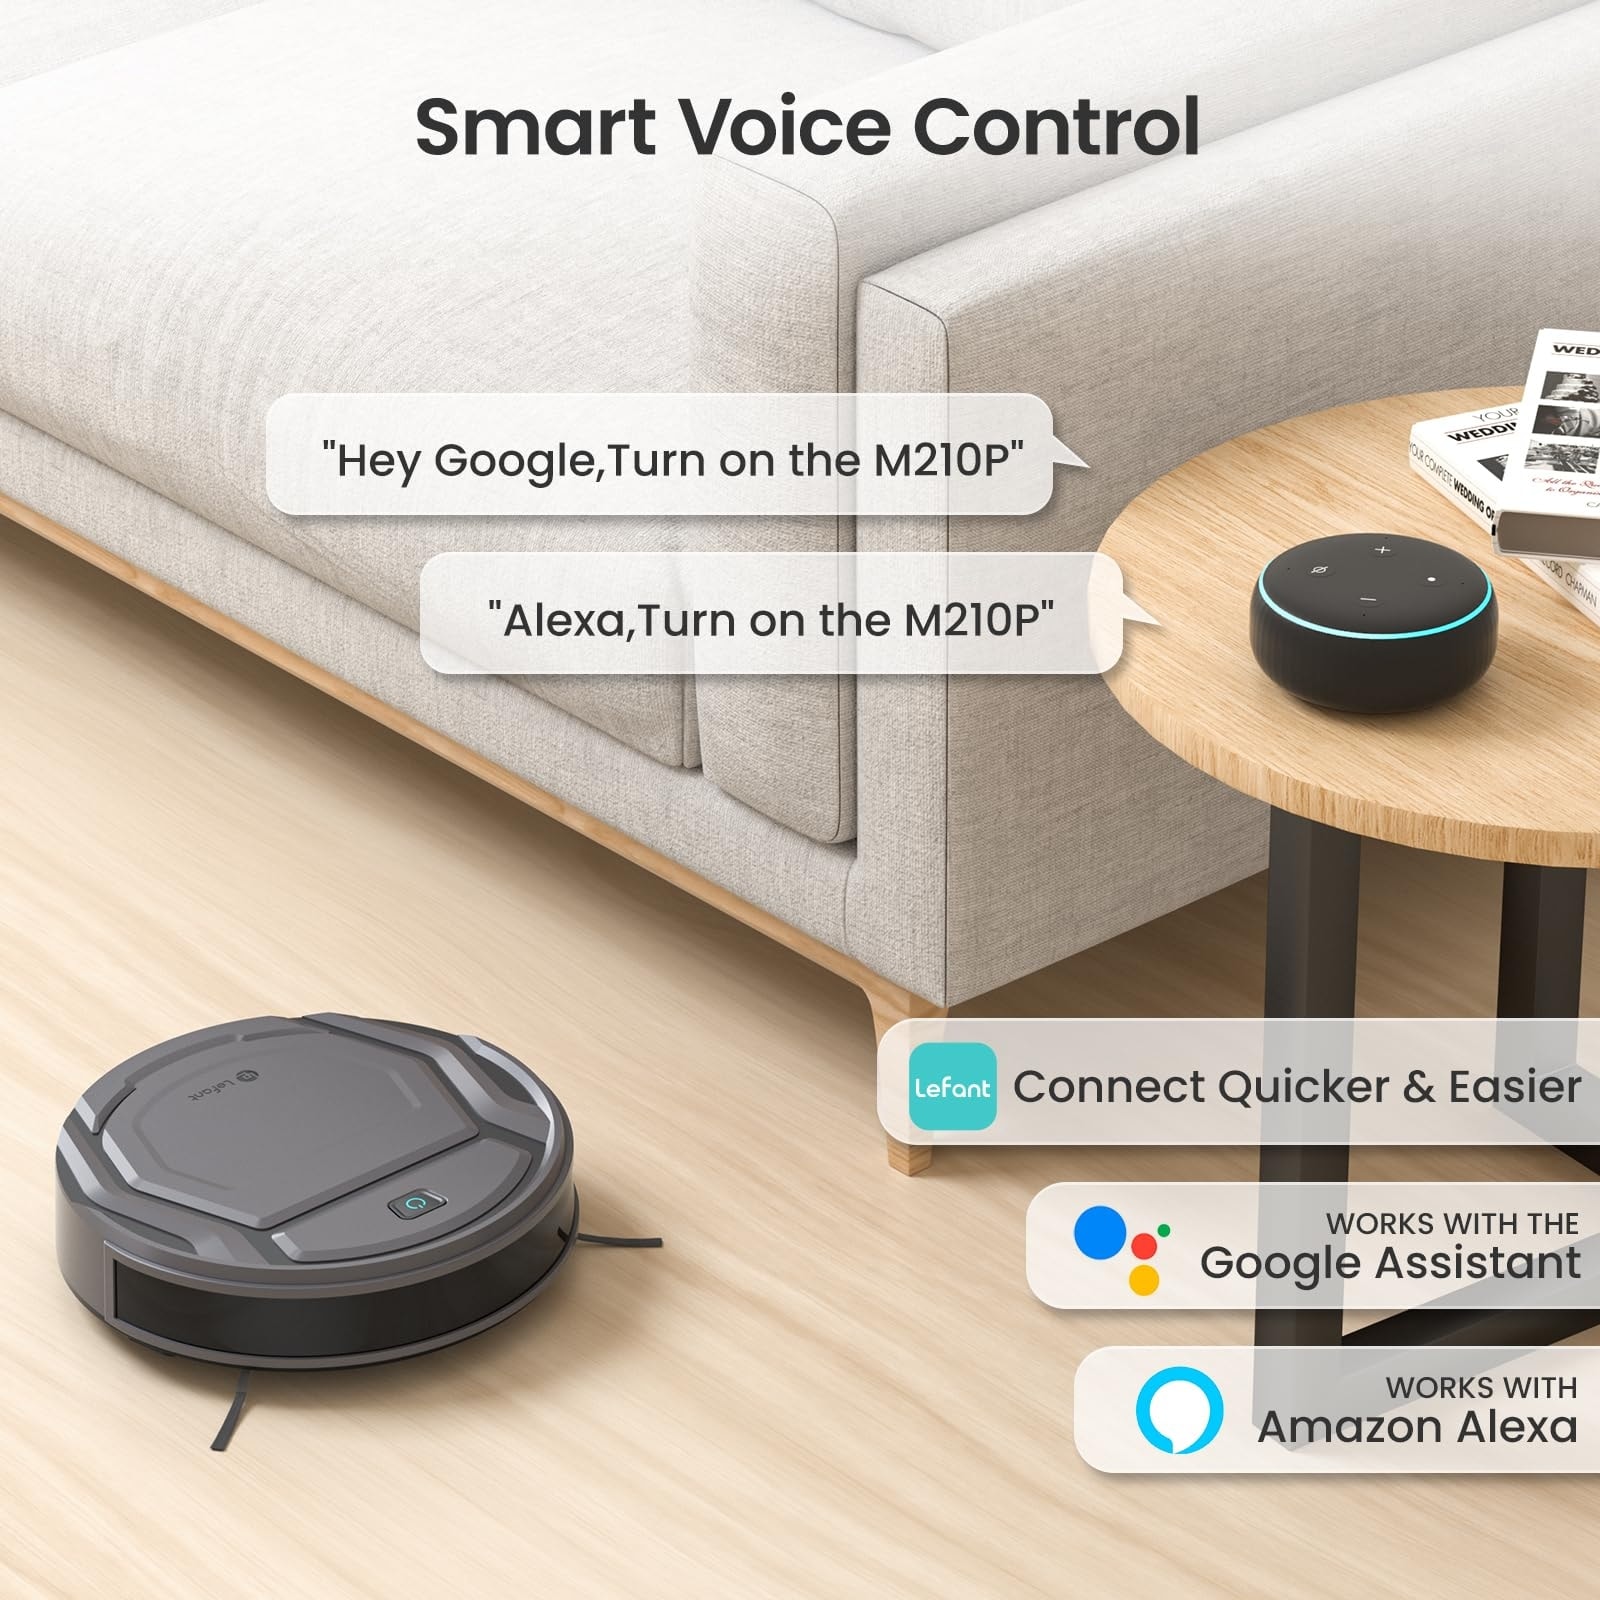 Lefant Robot Vacuum Cleaner with 2200Pa Powerful  Suction,Tangle-Free,Wi-Fi/App/Alexa,Featured 6 Cleaning Modes,Self-Charging  Slim Robotic Vacuum